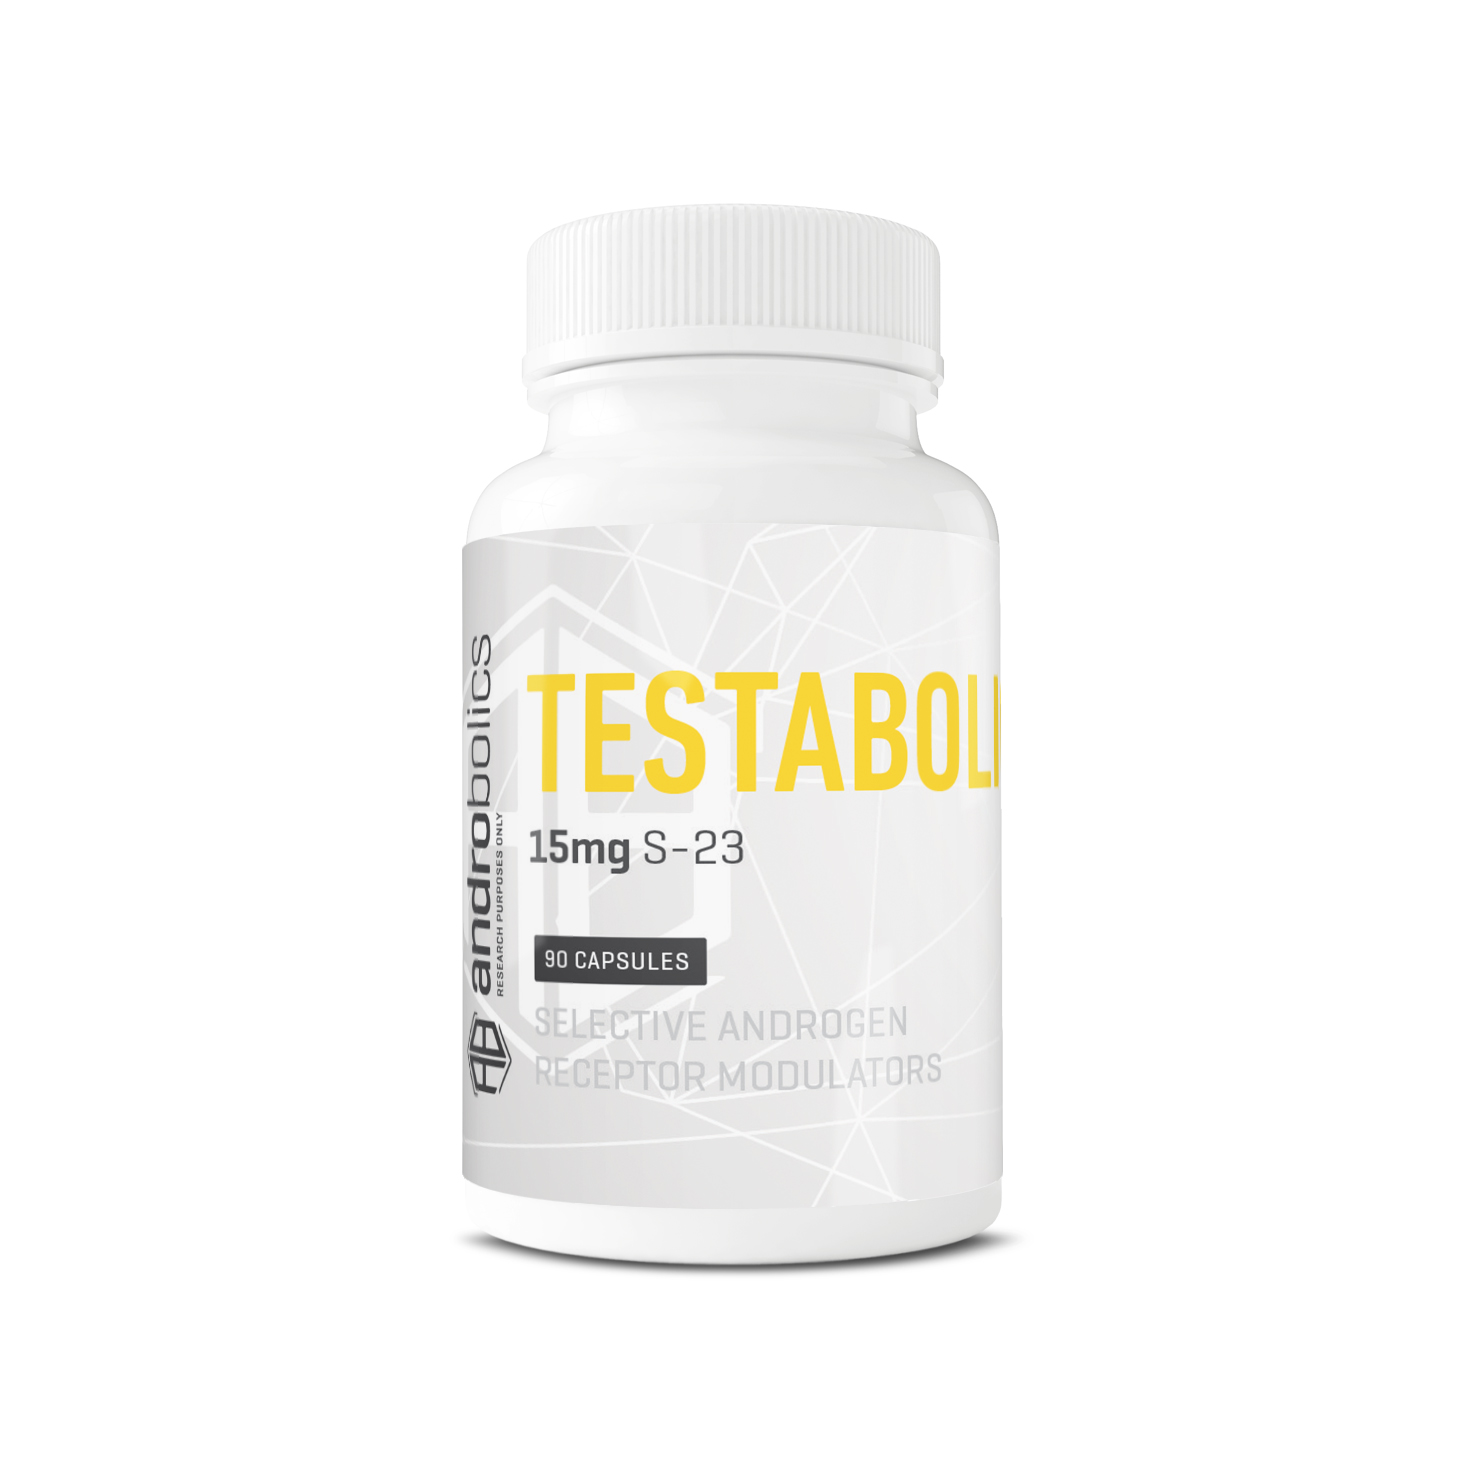 S23 Canada - Bottle of Testabolic S23 with 90 capsules of 15mg